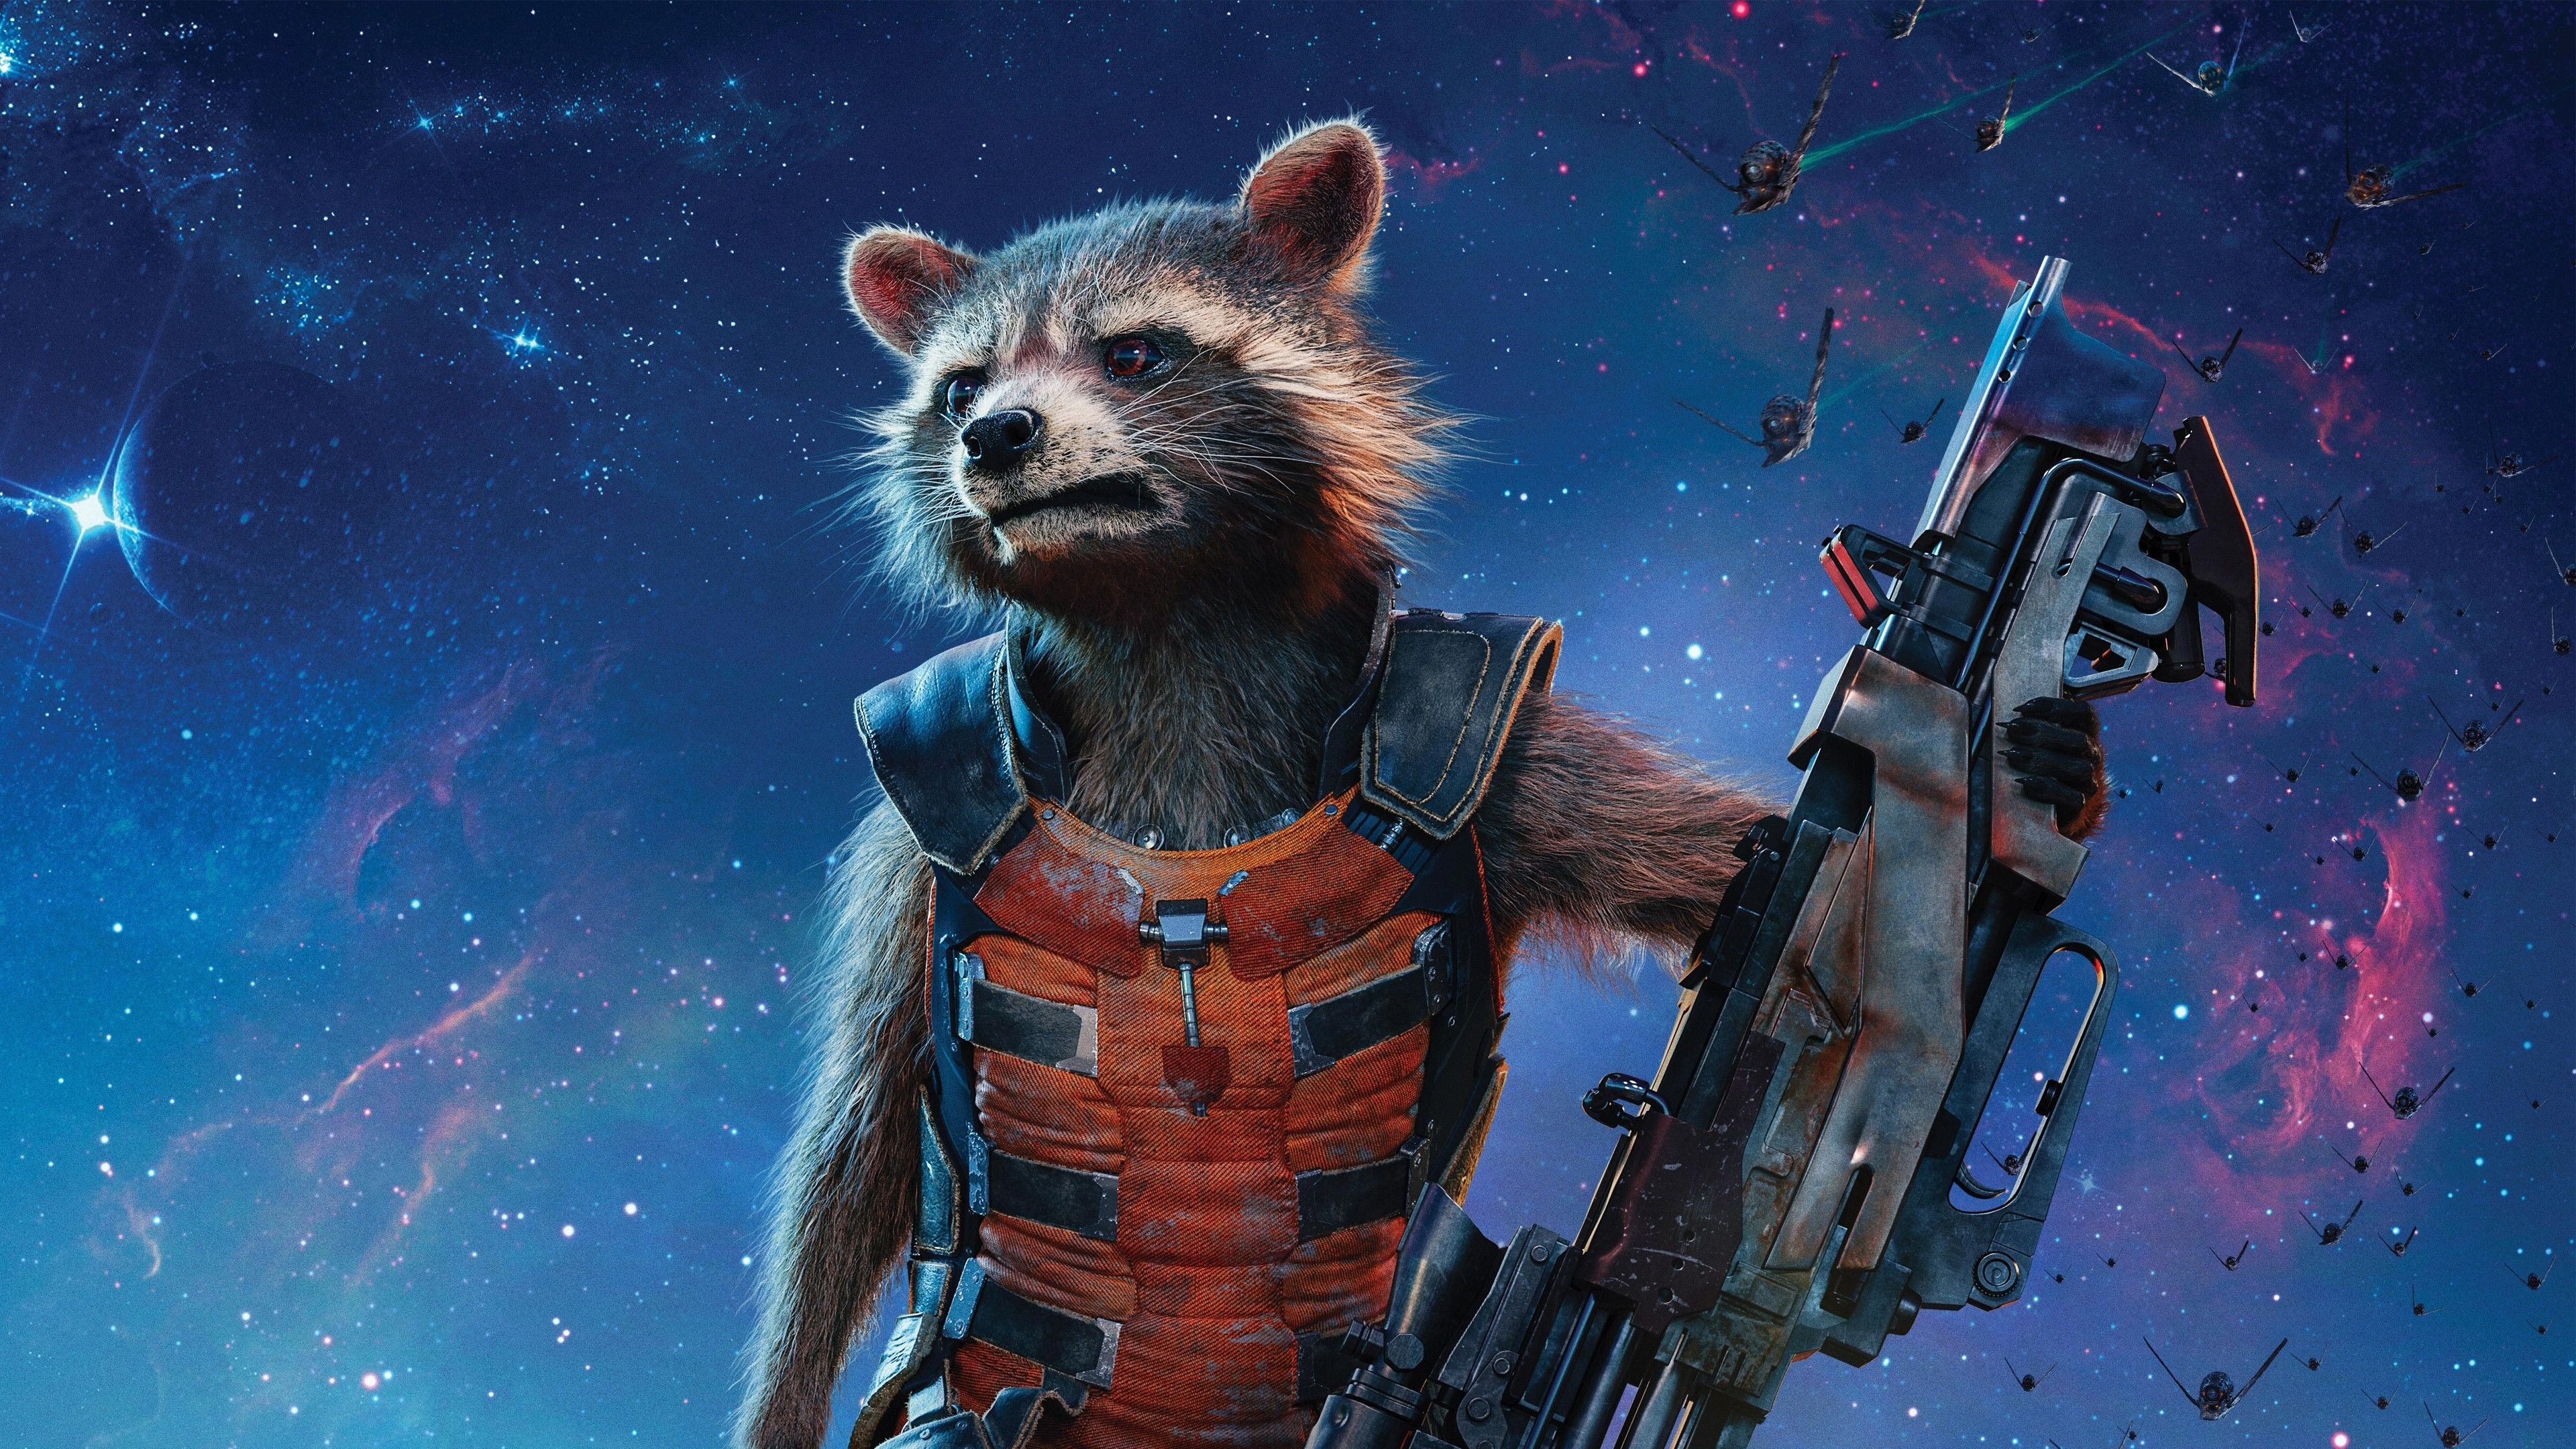 Which Avenger are you, Rocket Racoon, Guardians of the Galaxy vol 2, 3840x2160 4K Desktop